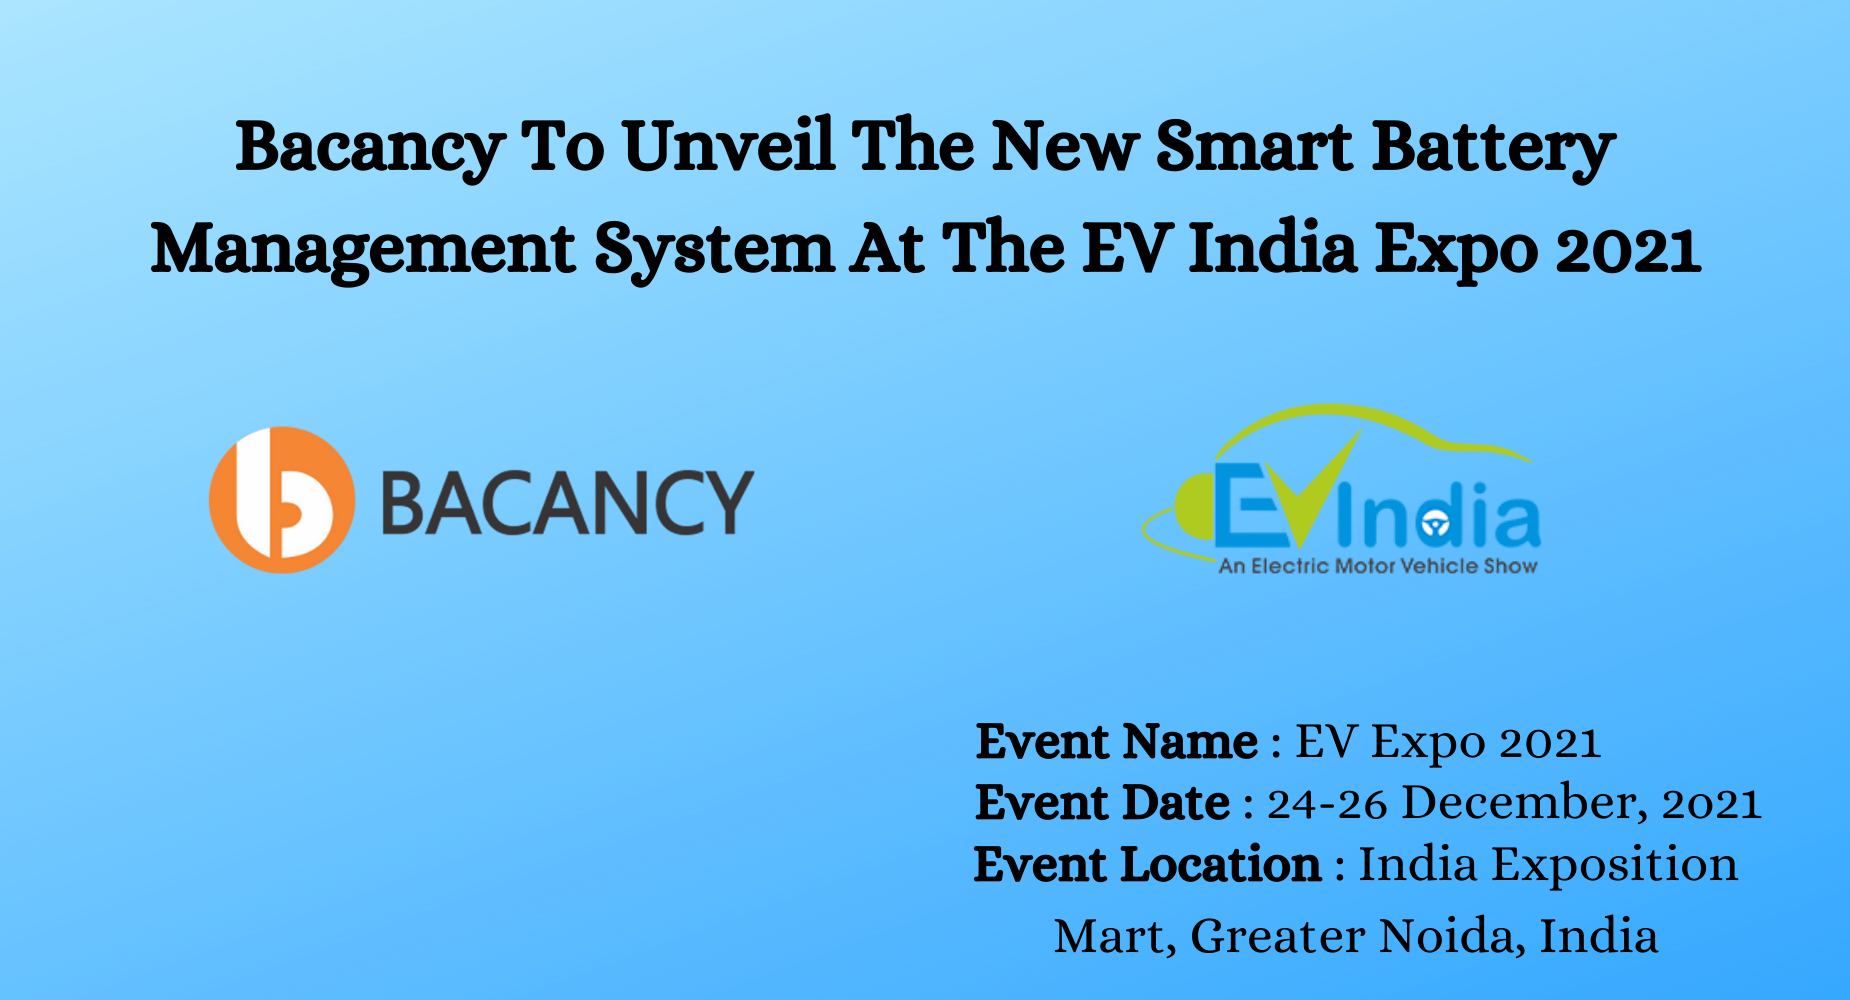 Bacancy To Unveil The New Smart Battery Management System At The EV India Expo 2021